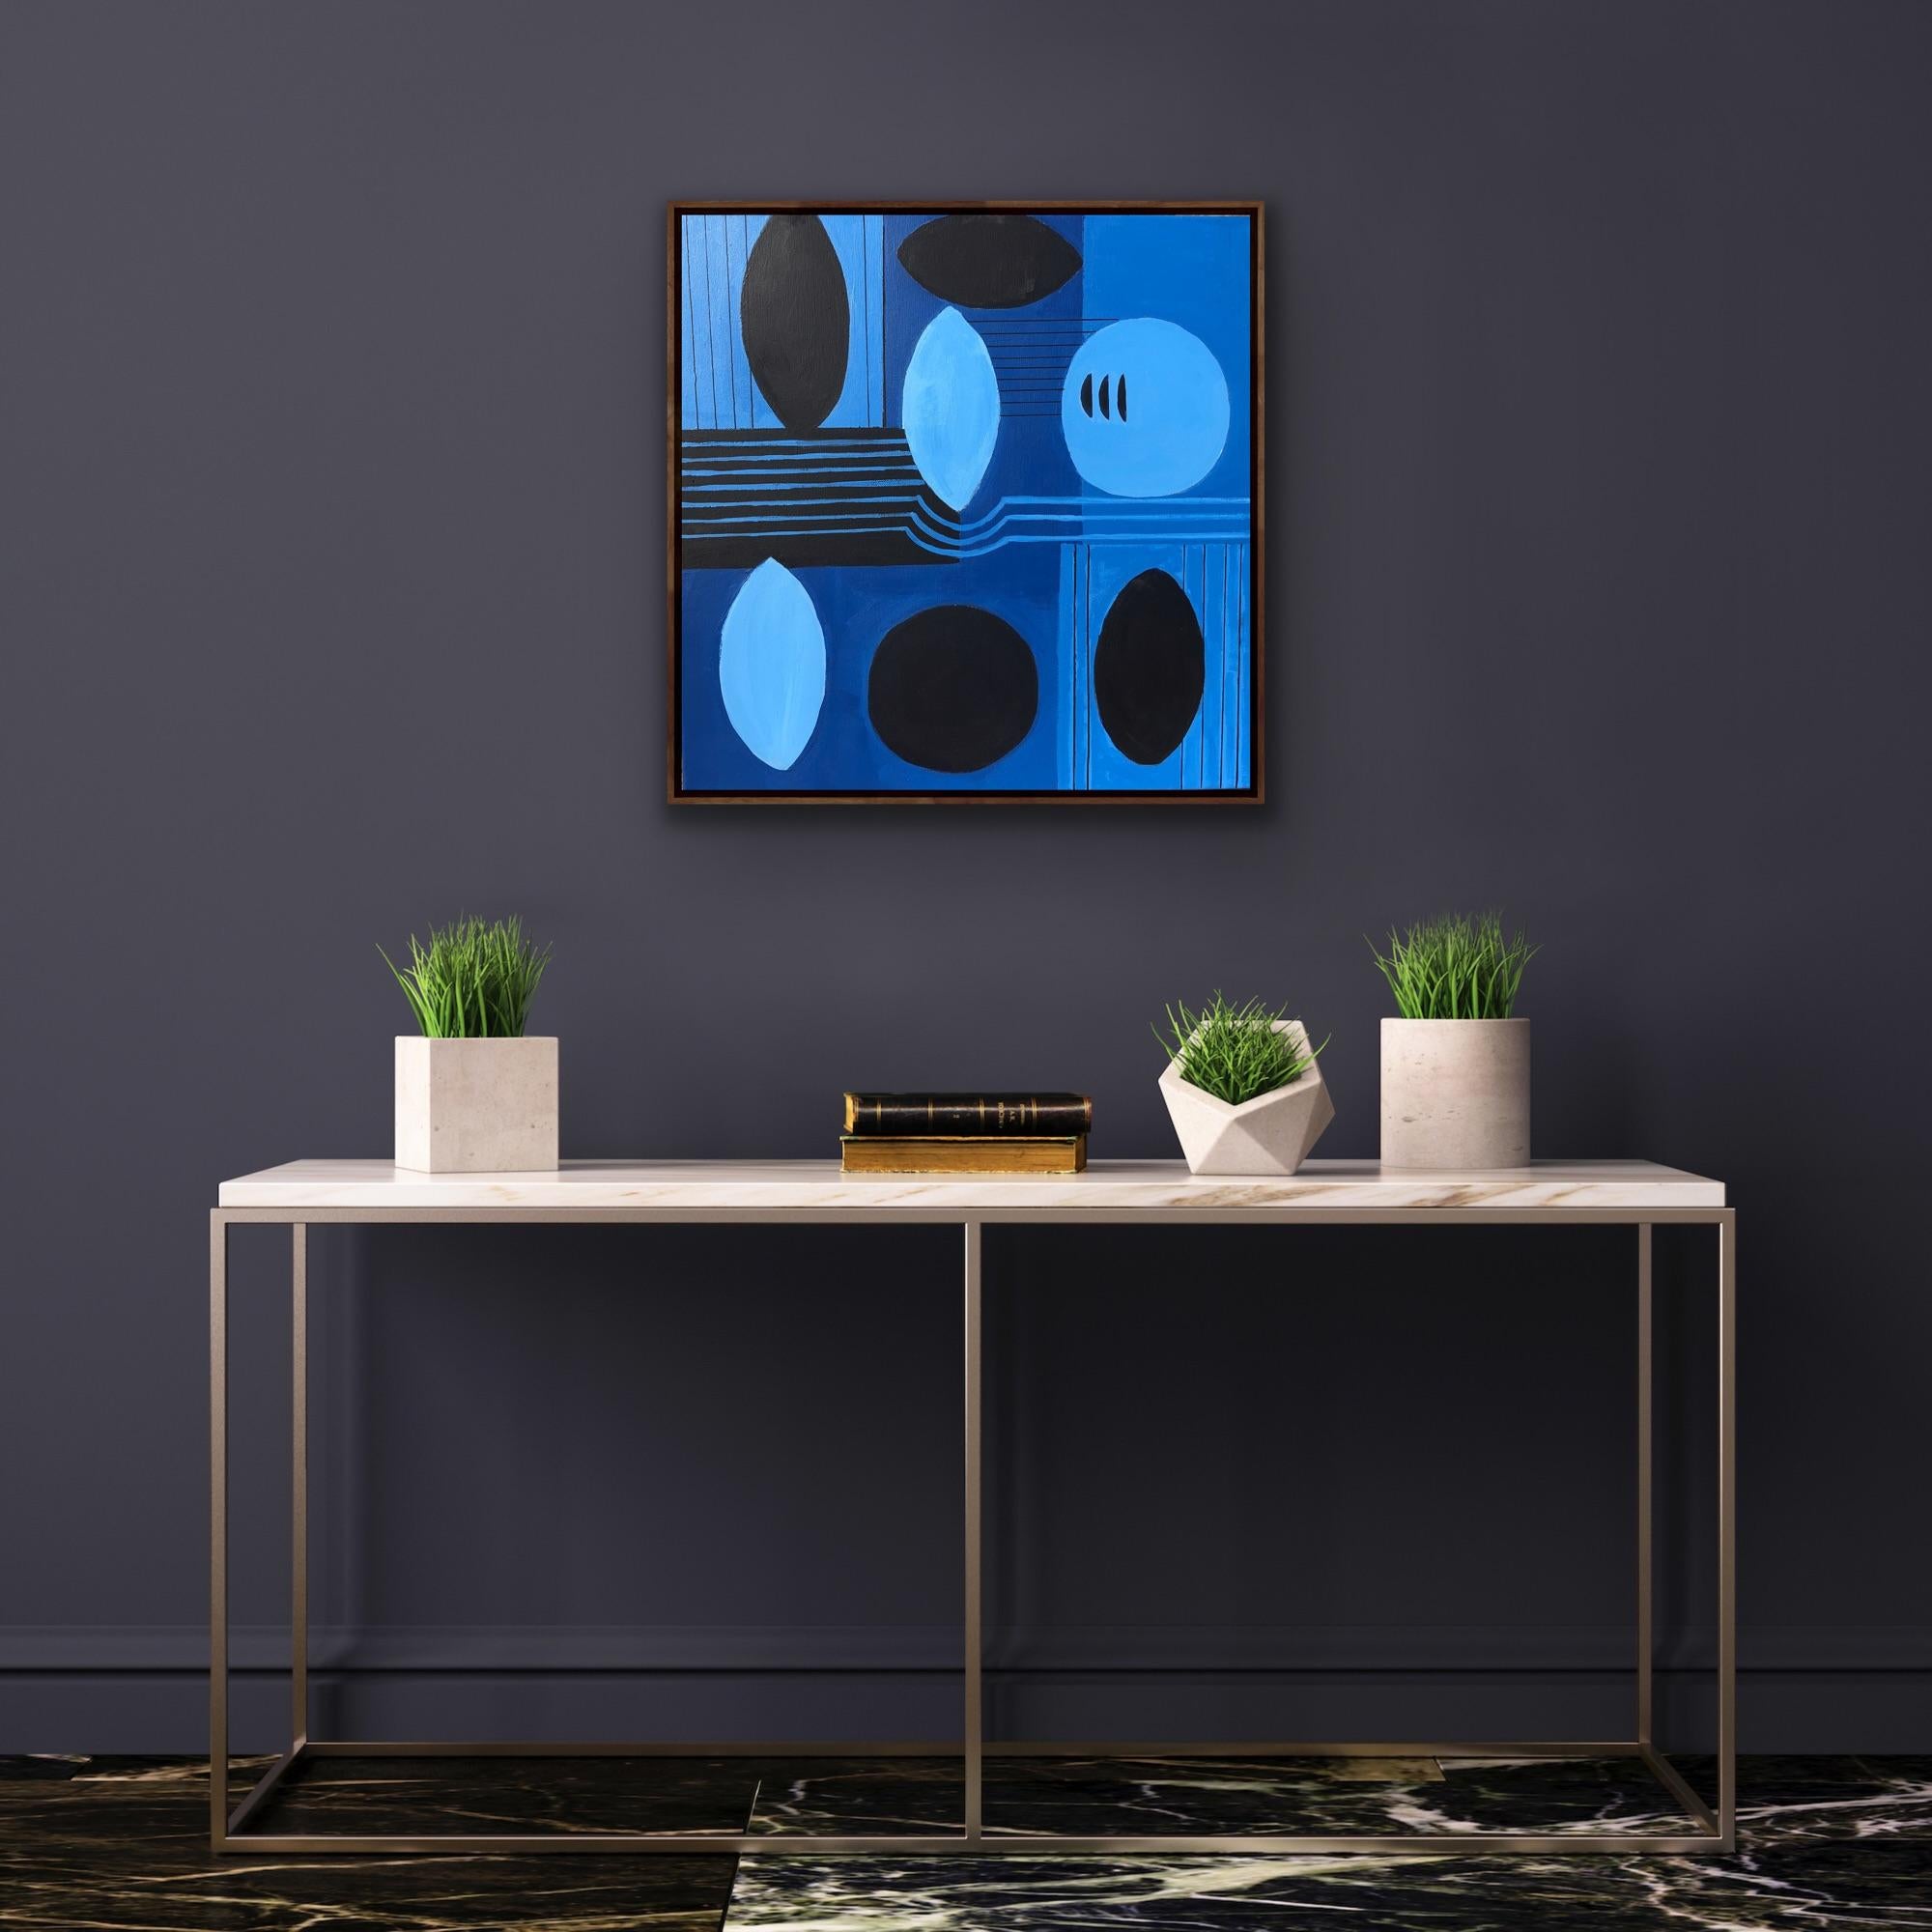 Berlin Blue, Maggie LaPorte Banks, Contemporary art, original abstract painting - Painting by Maggie LaPorte Banks 